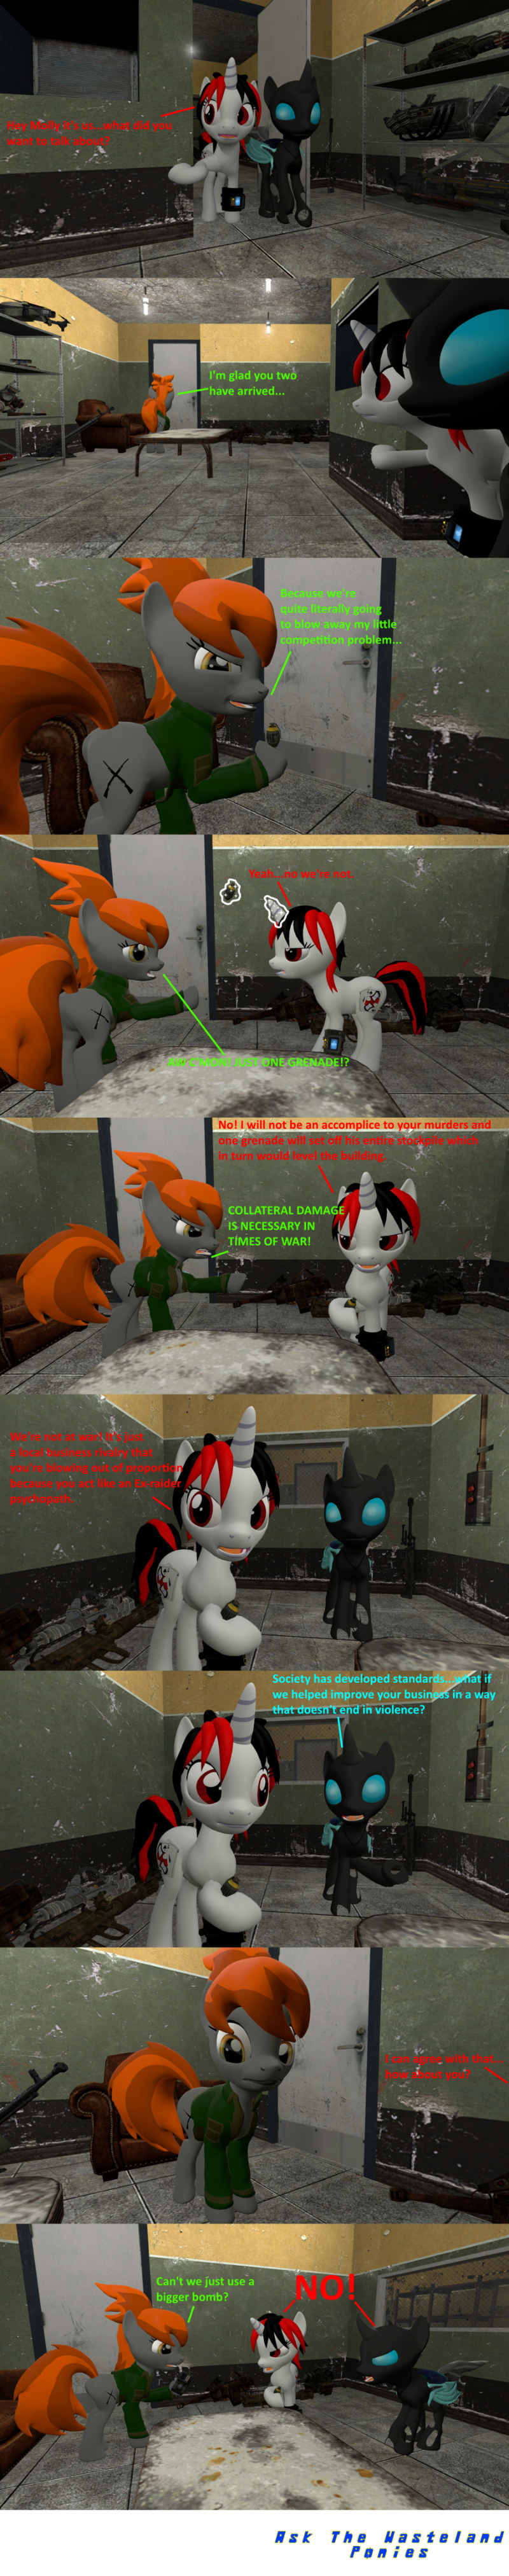 Page 40 [Competiton] [PART 2]